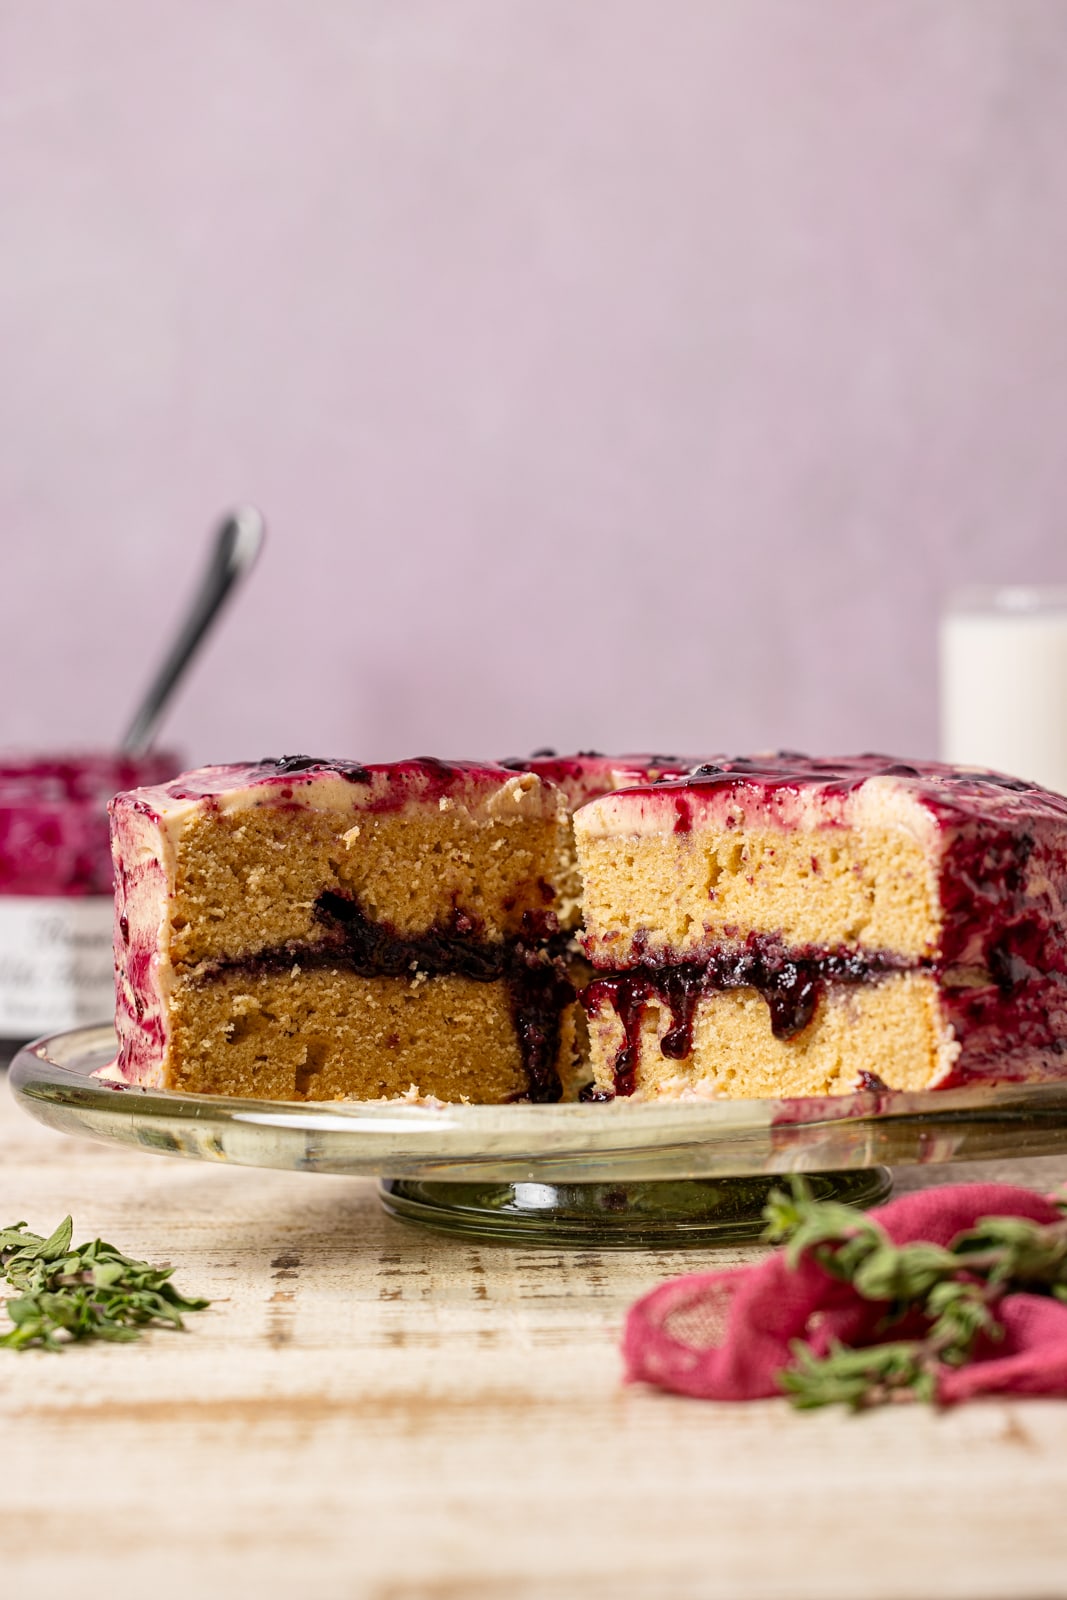 Cake sliced with milk and jam in the background.